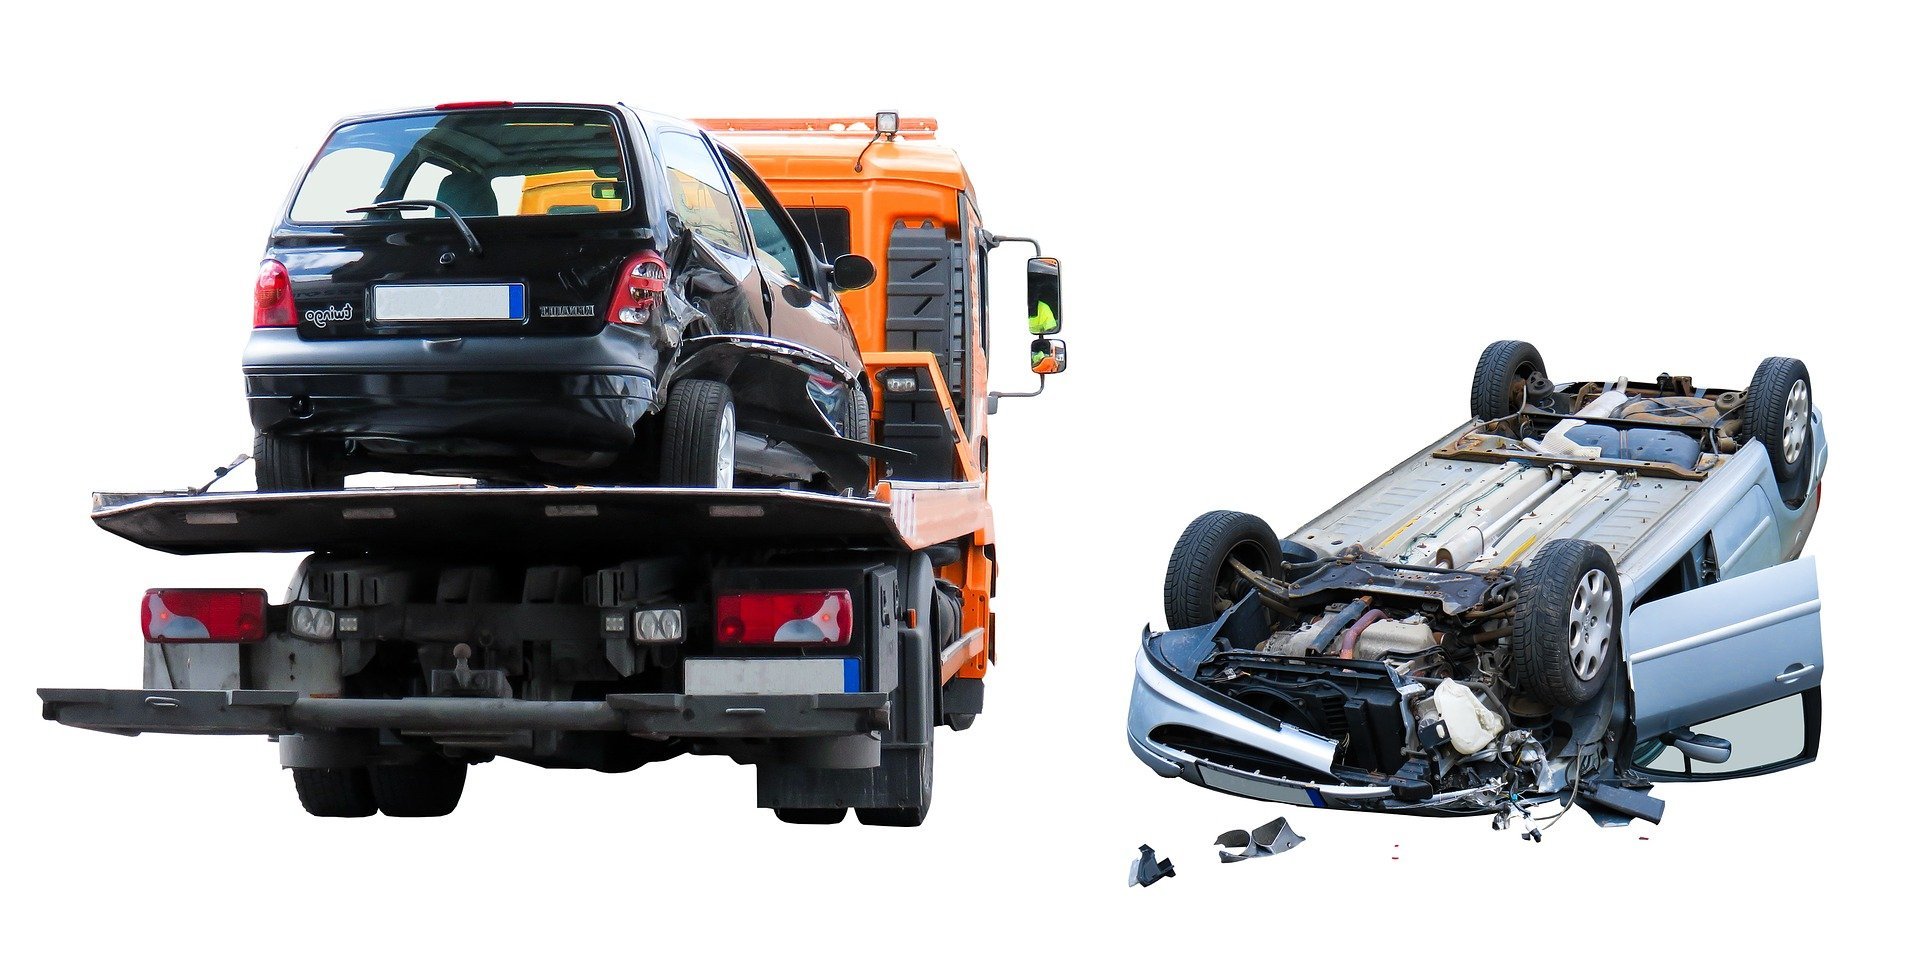 Look For Cash for Cars Services That Offers Free Towing